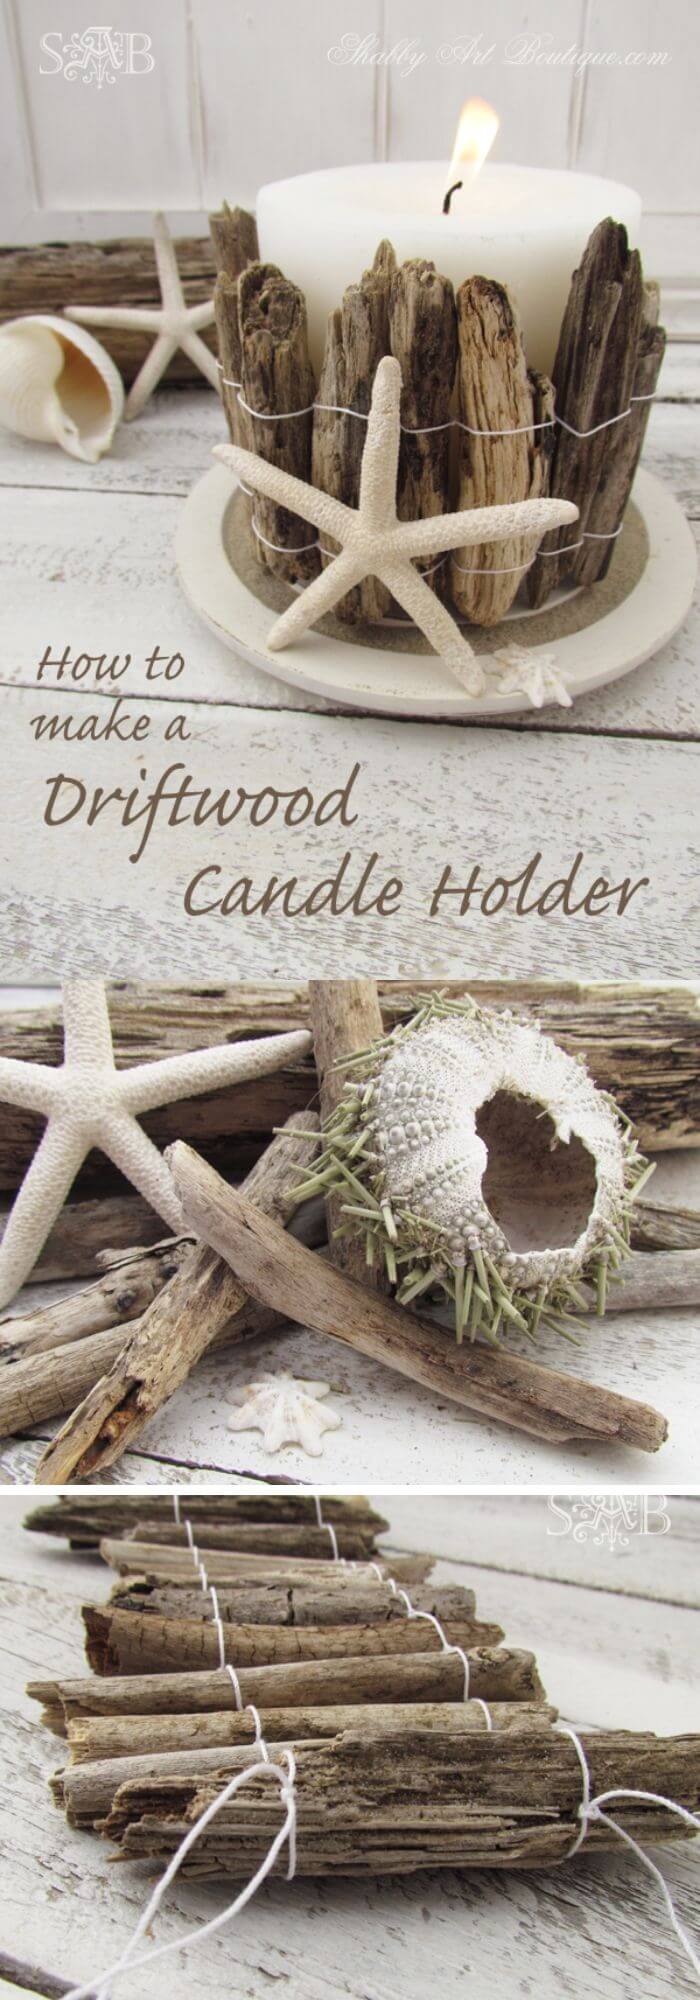 7 driftwood craft projects